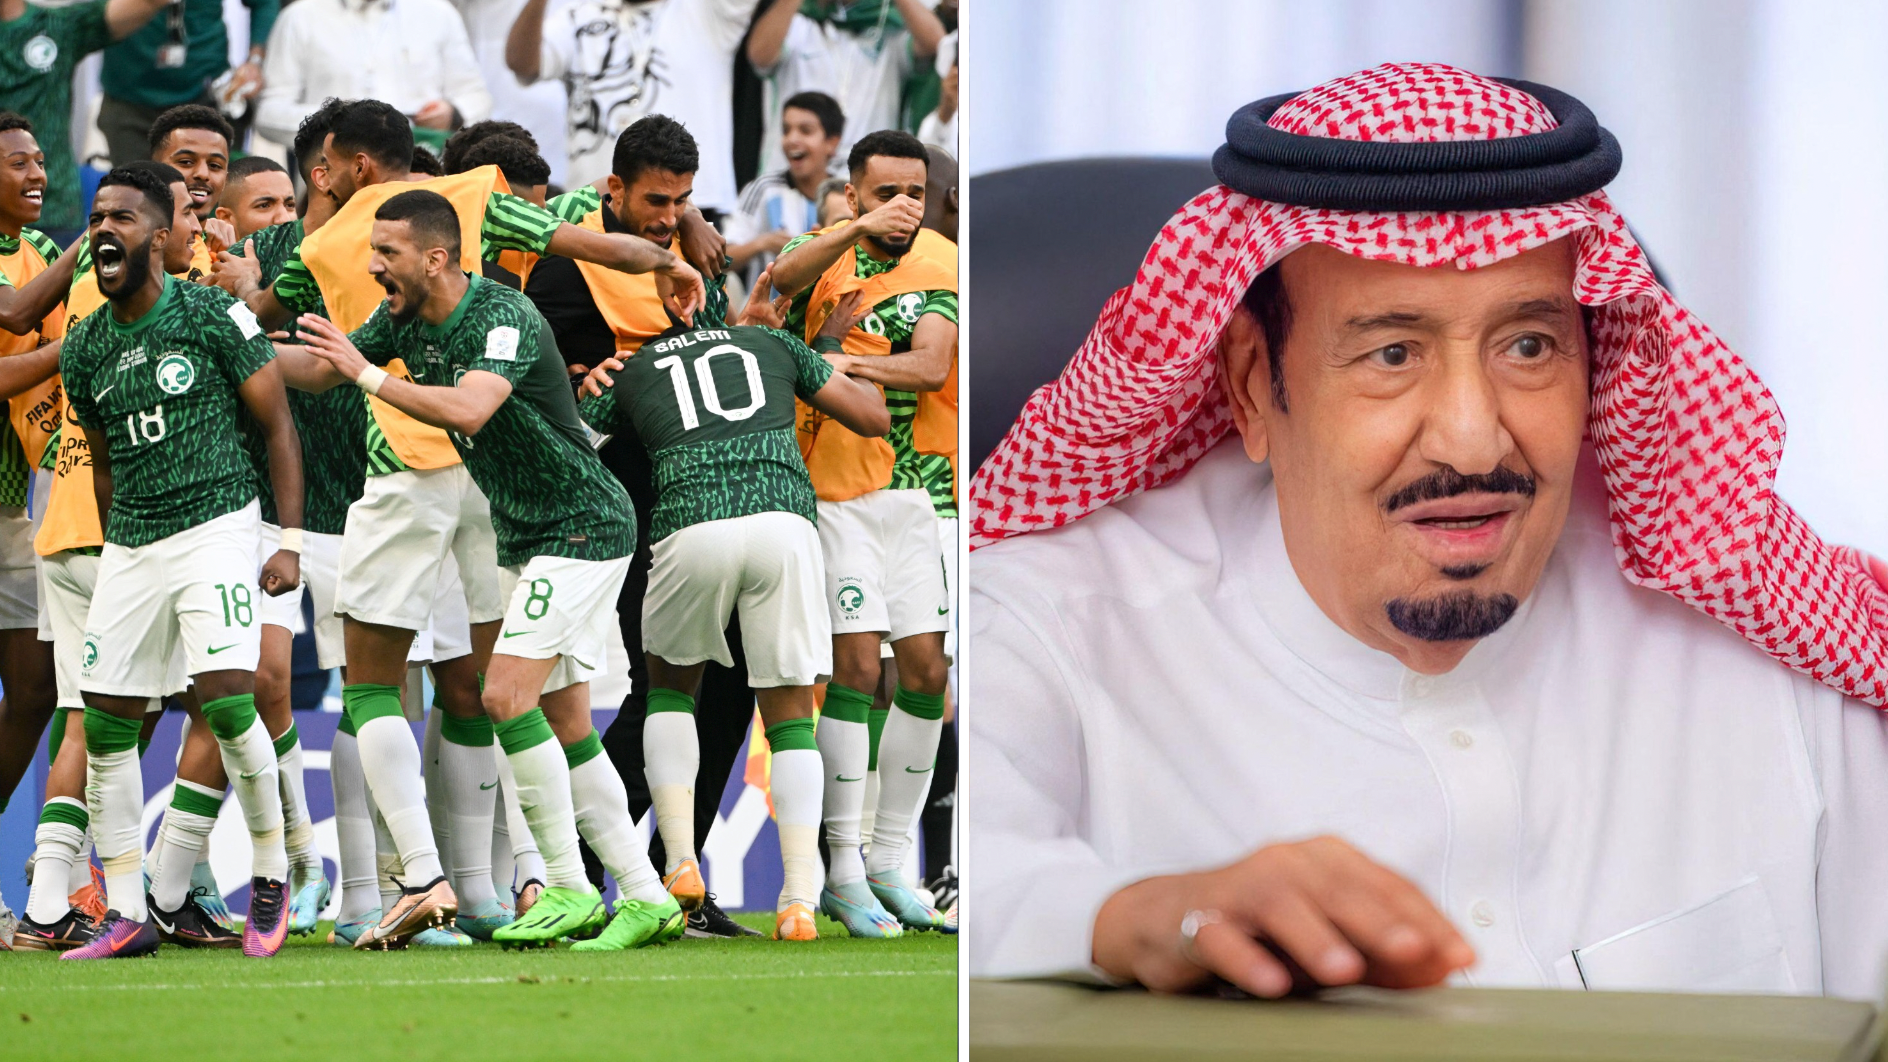 Crazy things happen, says Saudi Arabia manager after WC win over